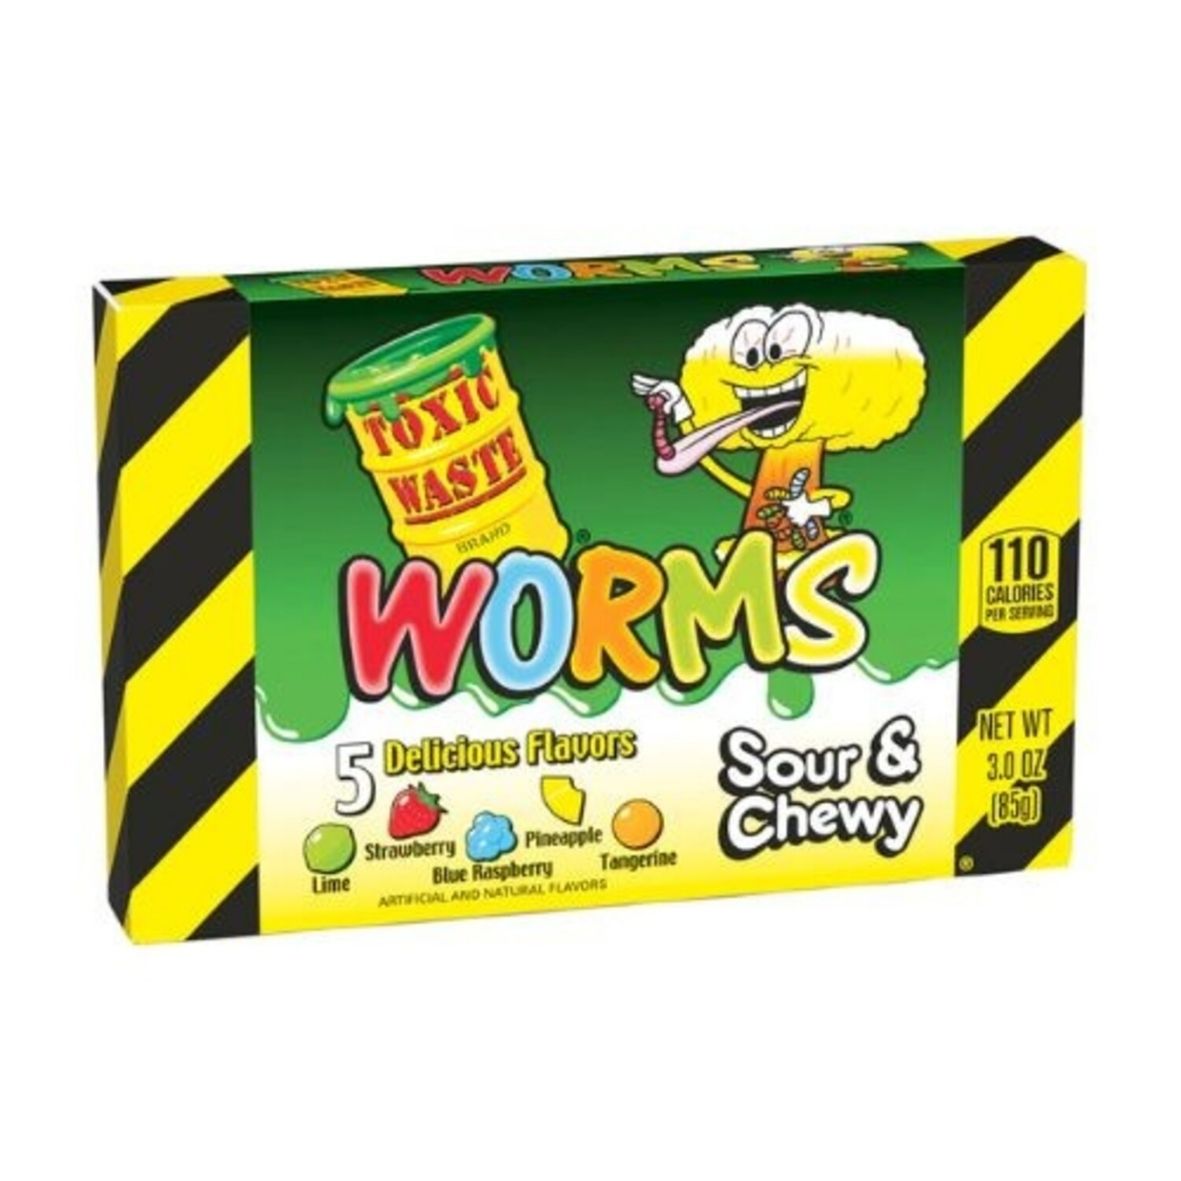 Toxic Waste - Worms